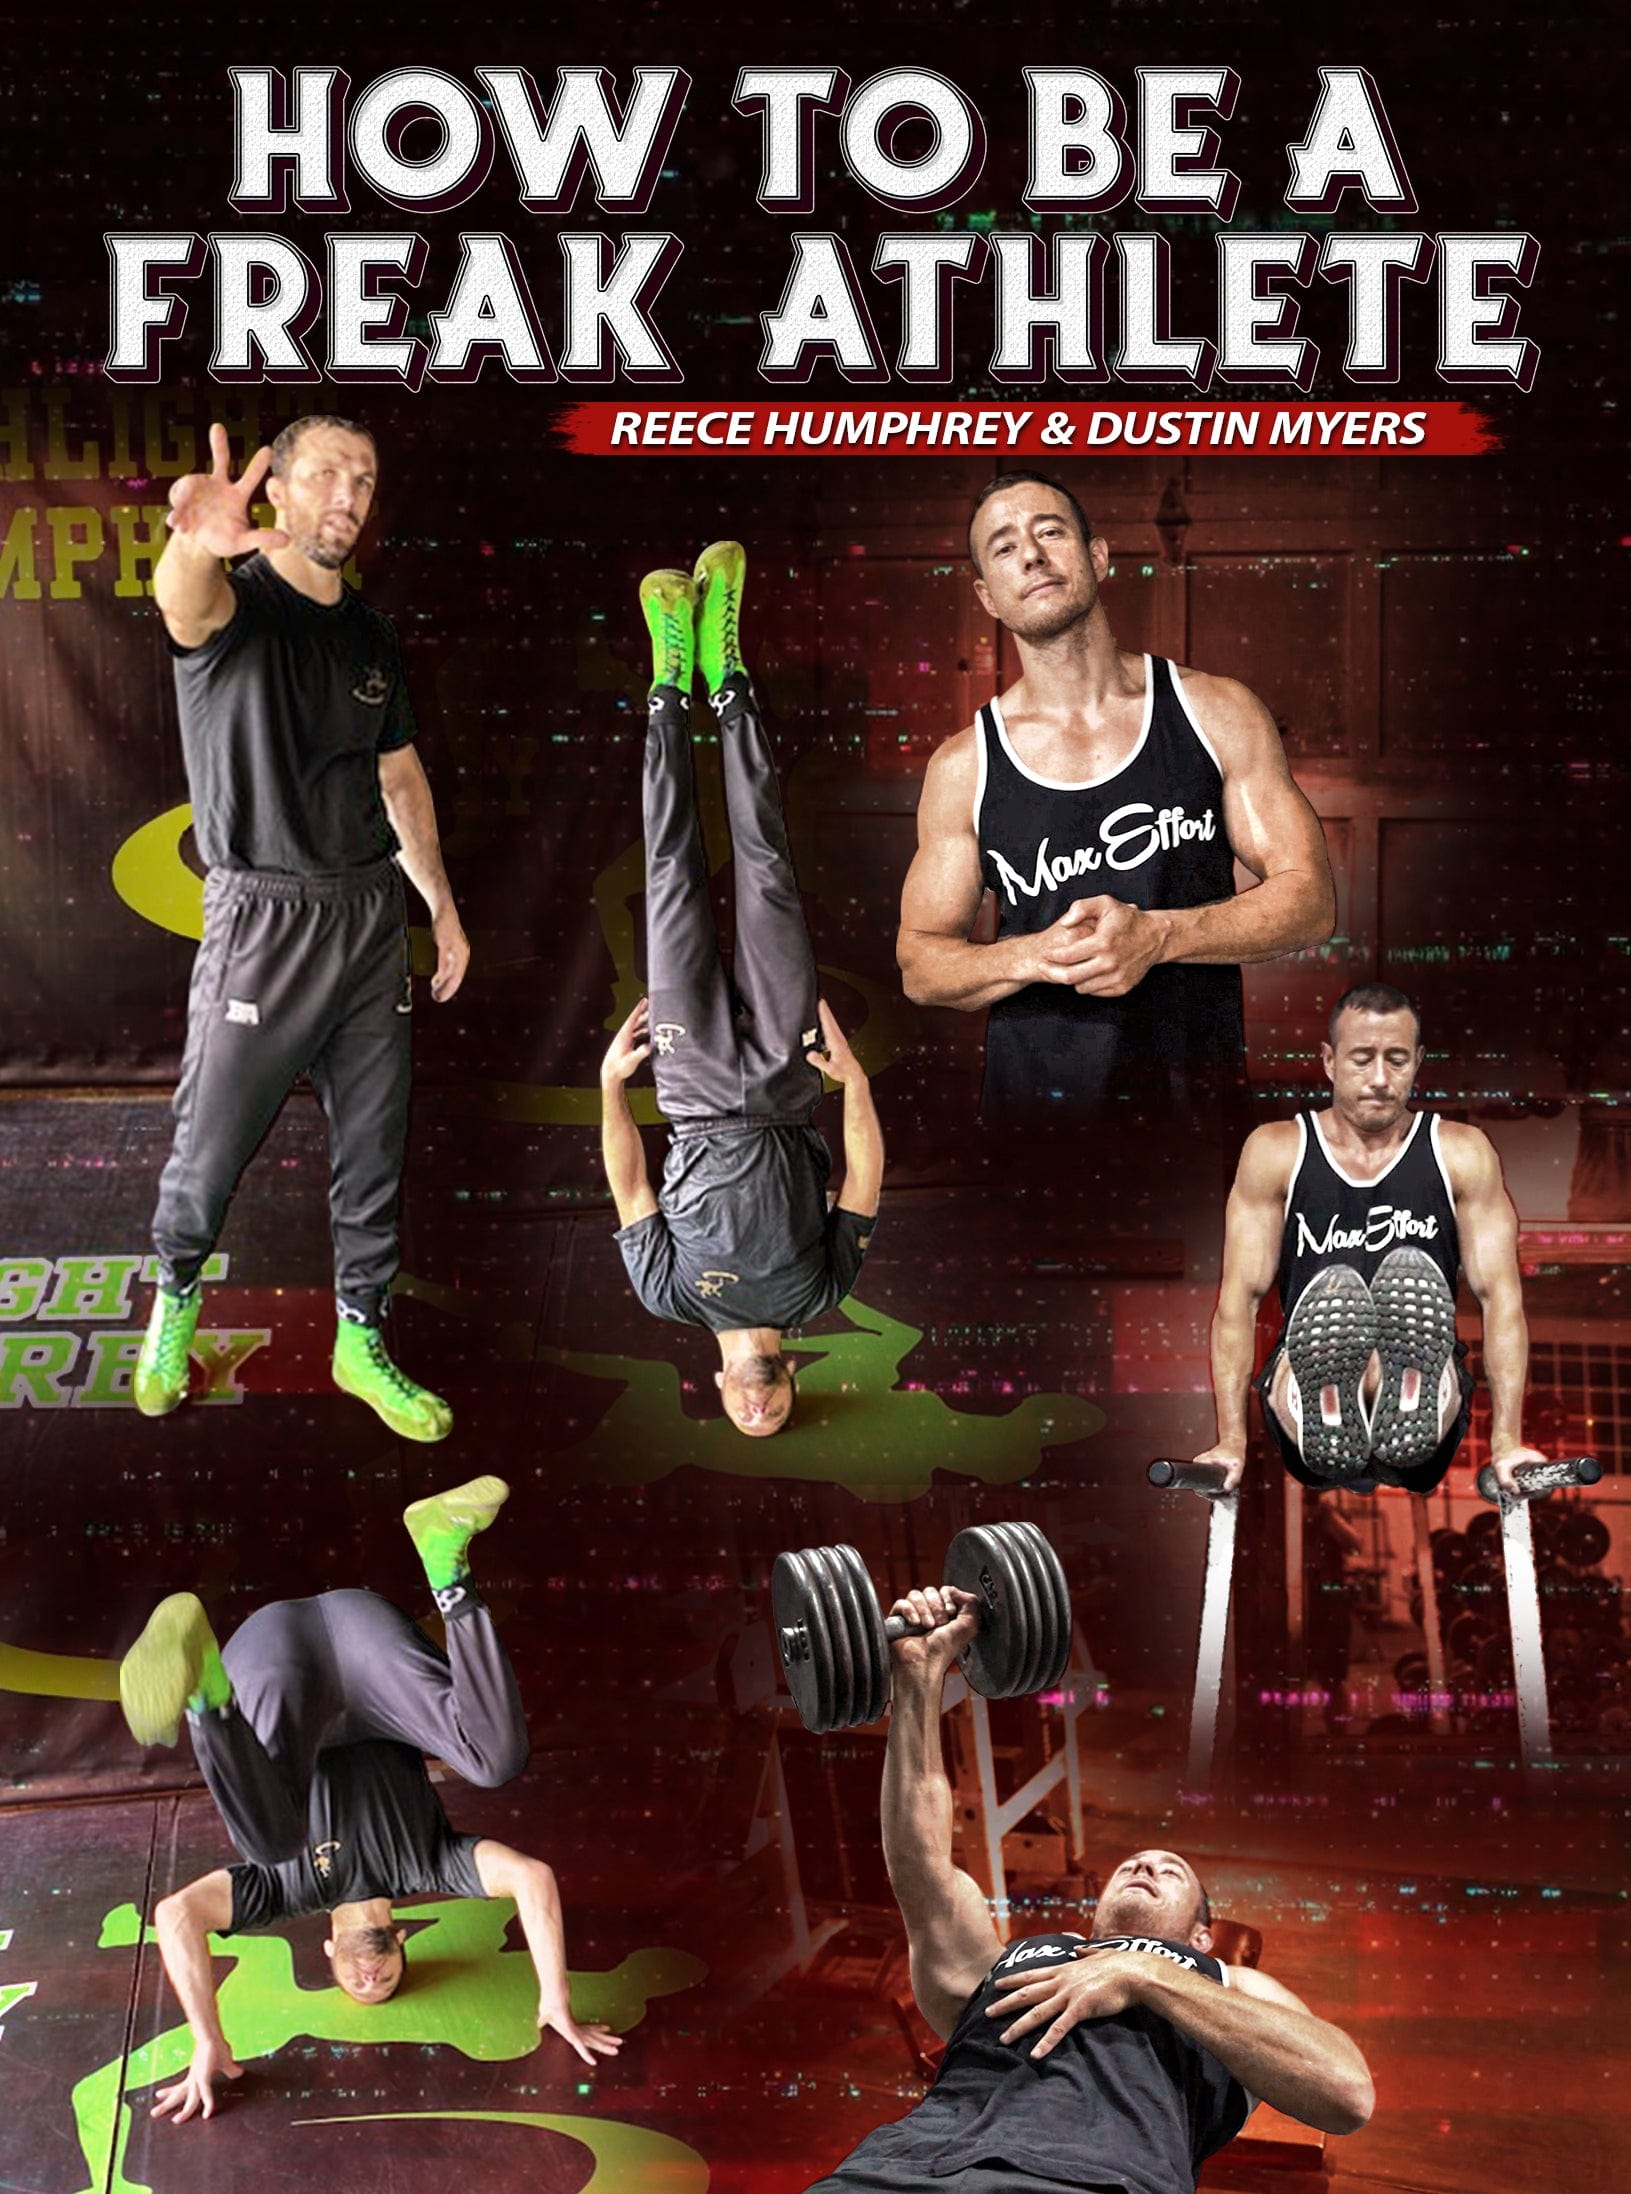 How To Be A Freak Athlete by Reece Humphrey & Dustin Myers - Fanatic Wrestling